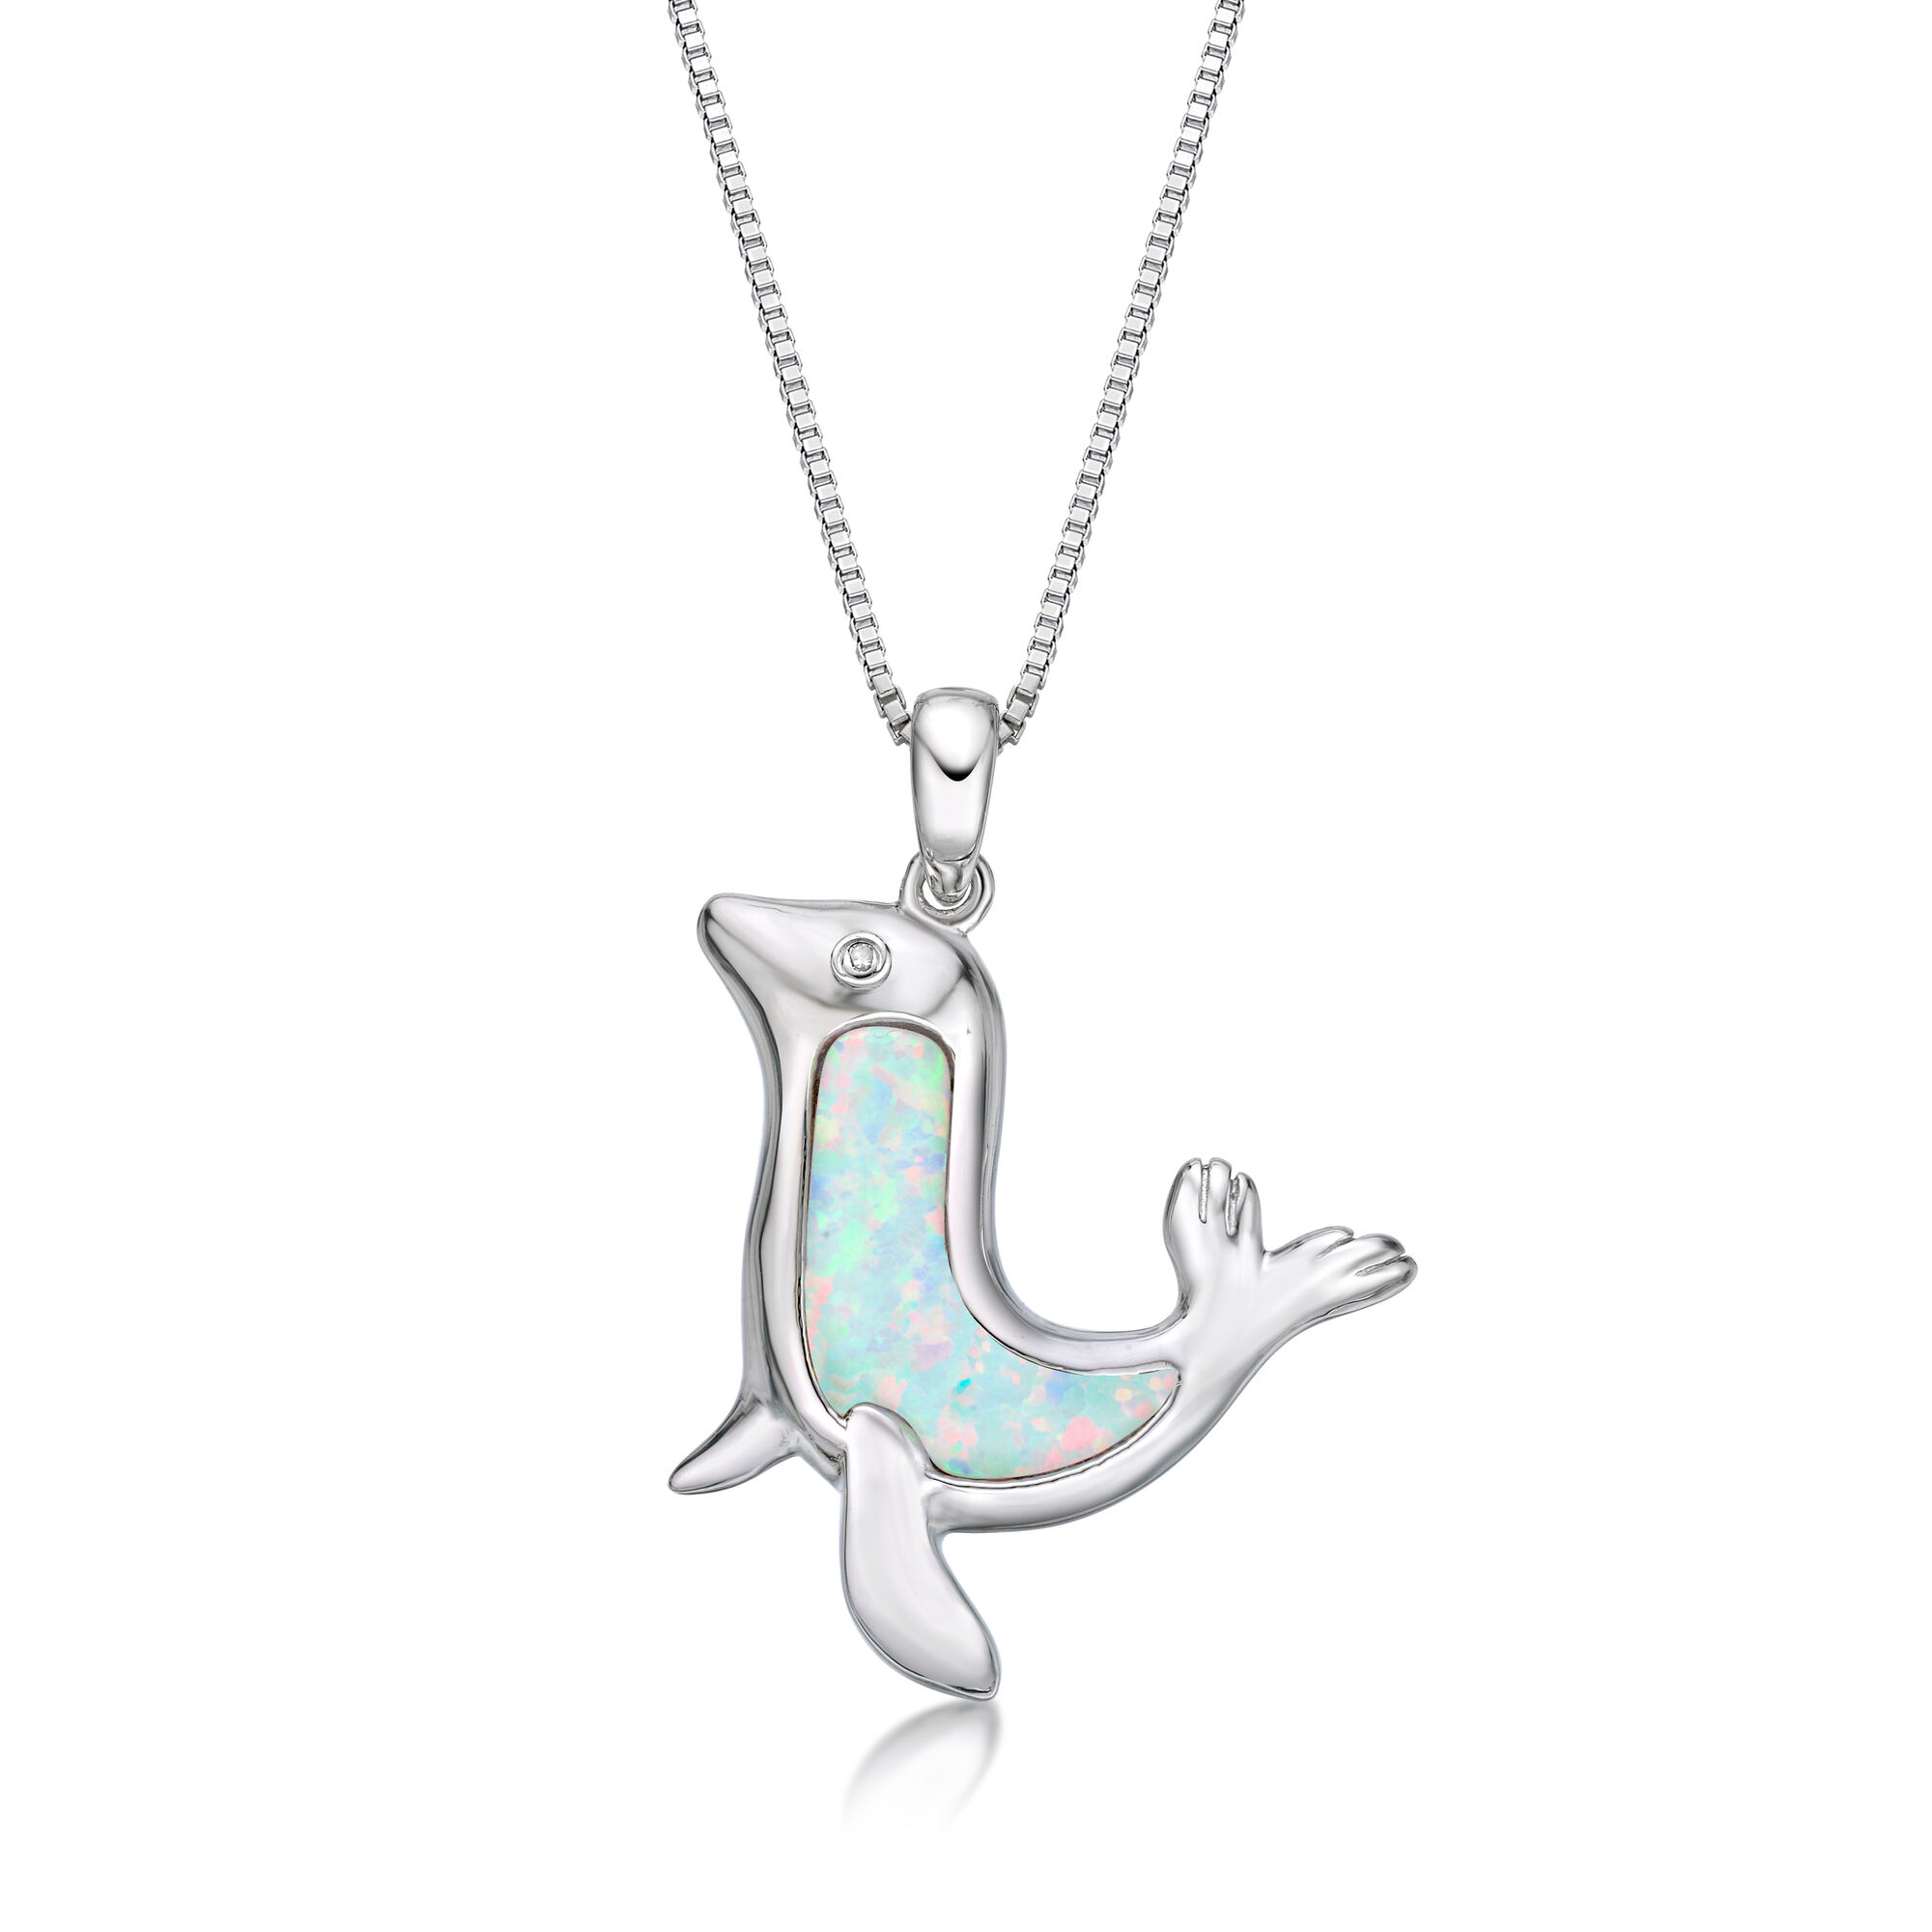 Lavari Jewelers Women's Created White Opal Sea Lion Diamond Pendant with Lobster Clasp, Sterling Silver, .015 Cttw, 18 Inch Cable Chain